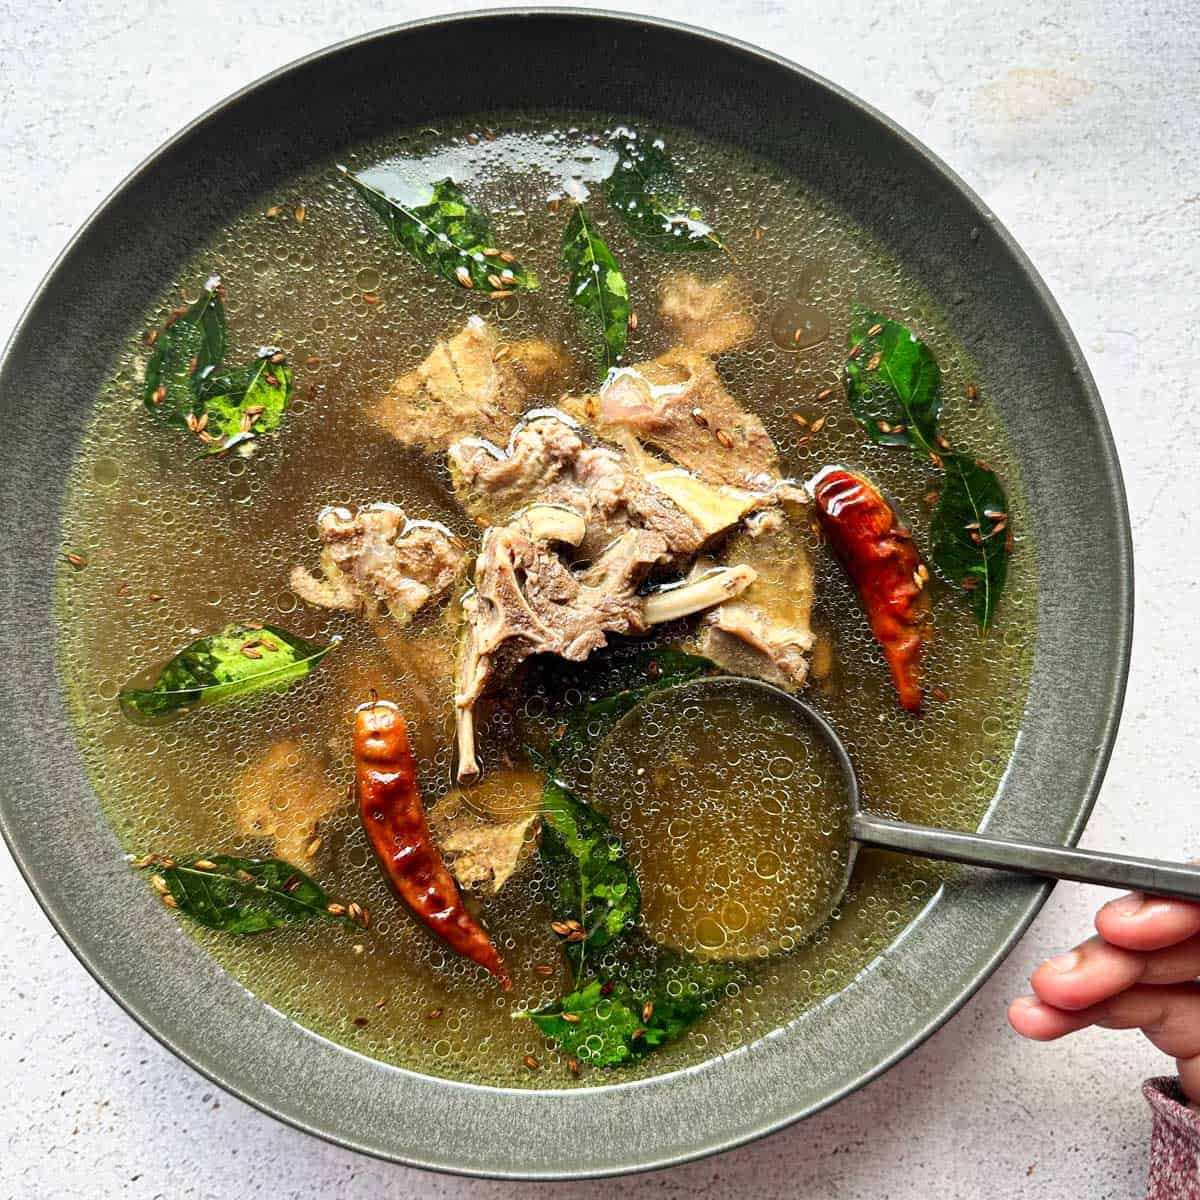 A big gray bowl of mutton bone broth soup with a hand holding a metal spoon.